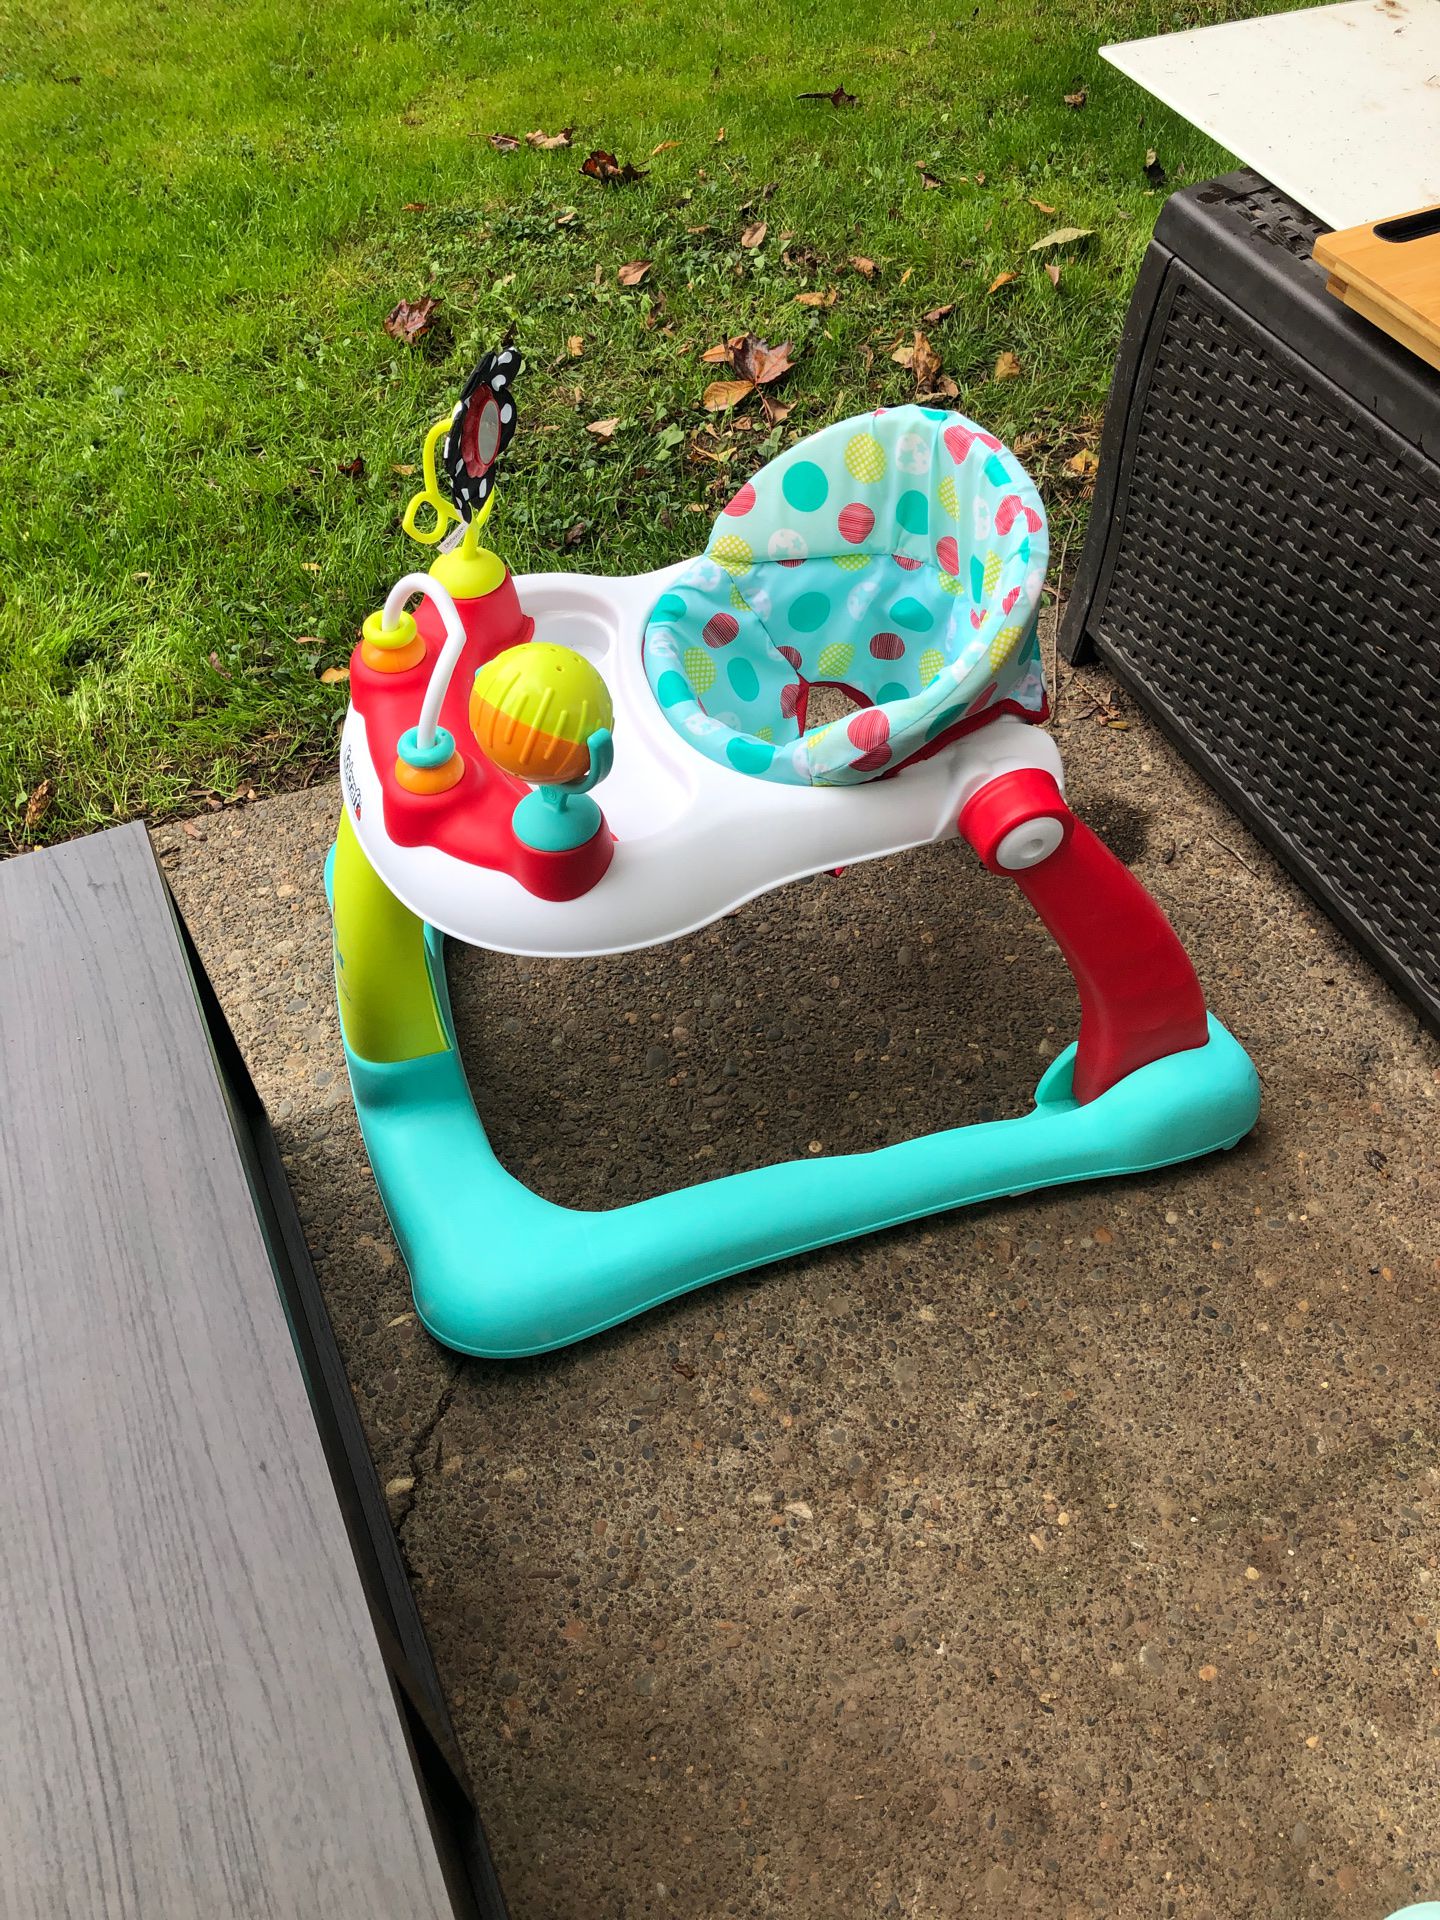 Kids toys and potty chair